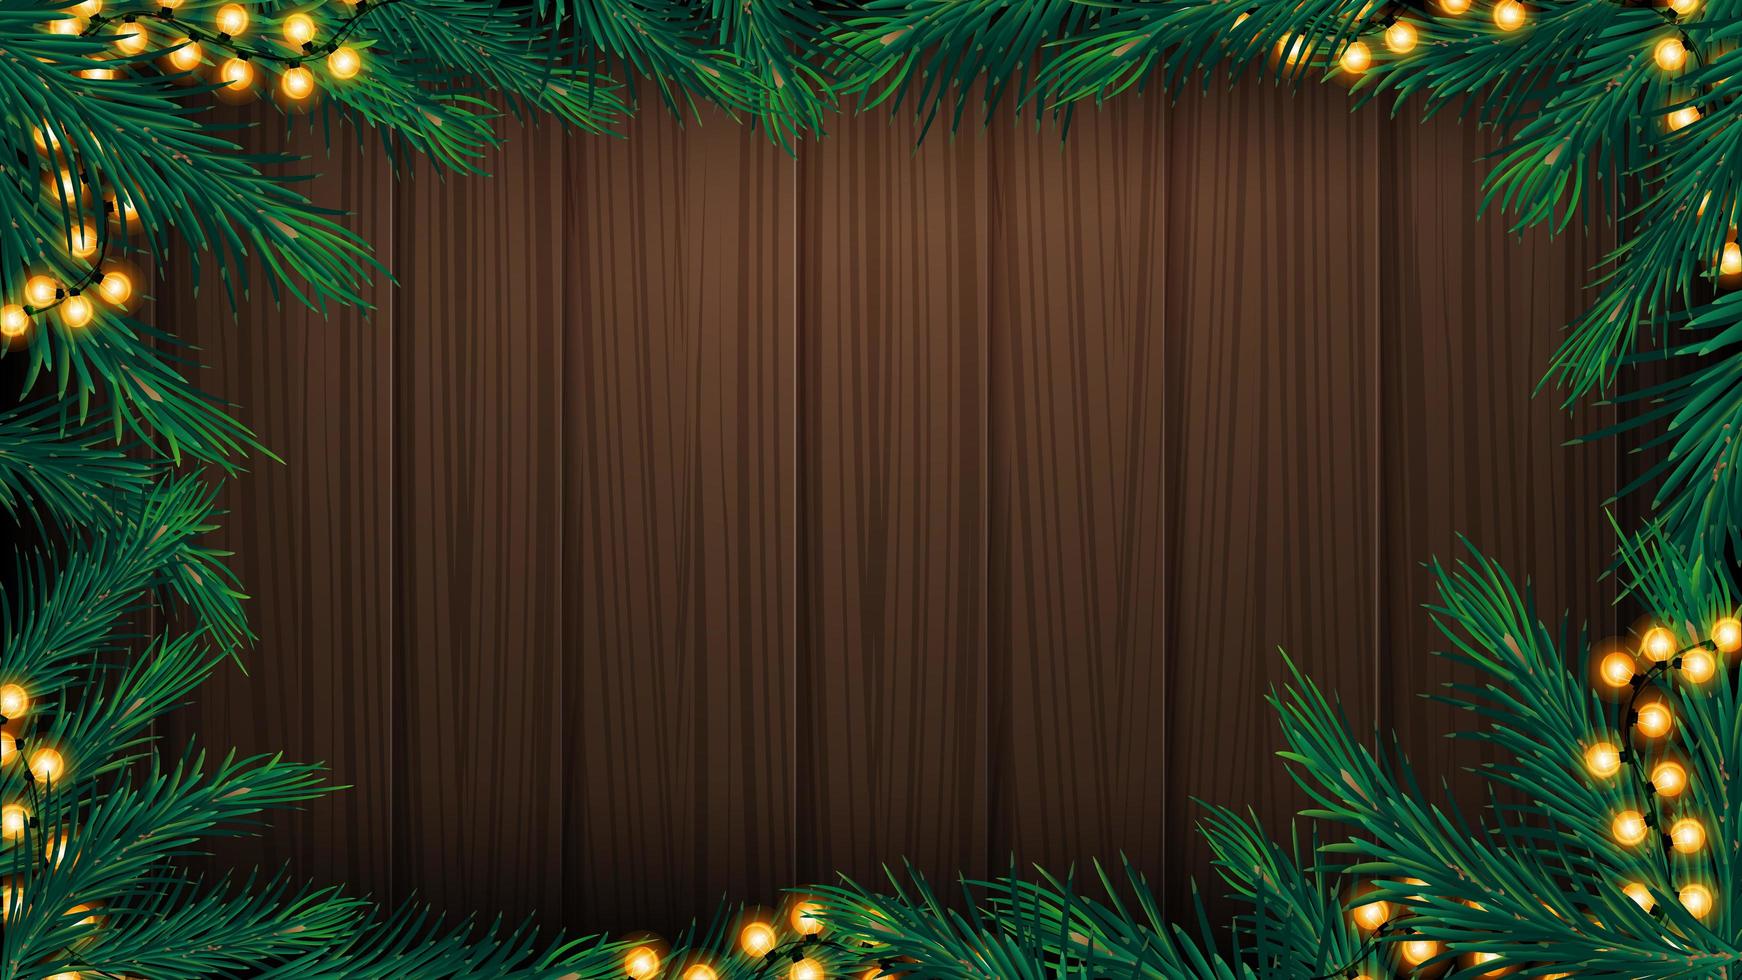 Wooden wall with Christmas tree branches frame and garland. Wooden Christmas background for your arts vector